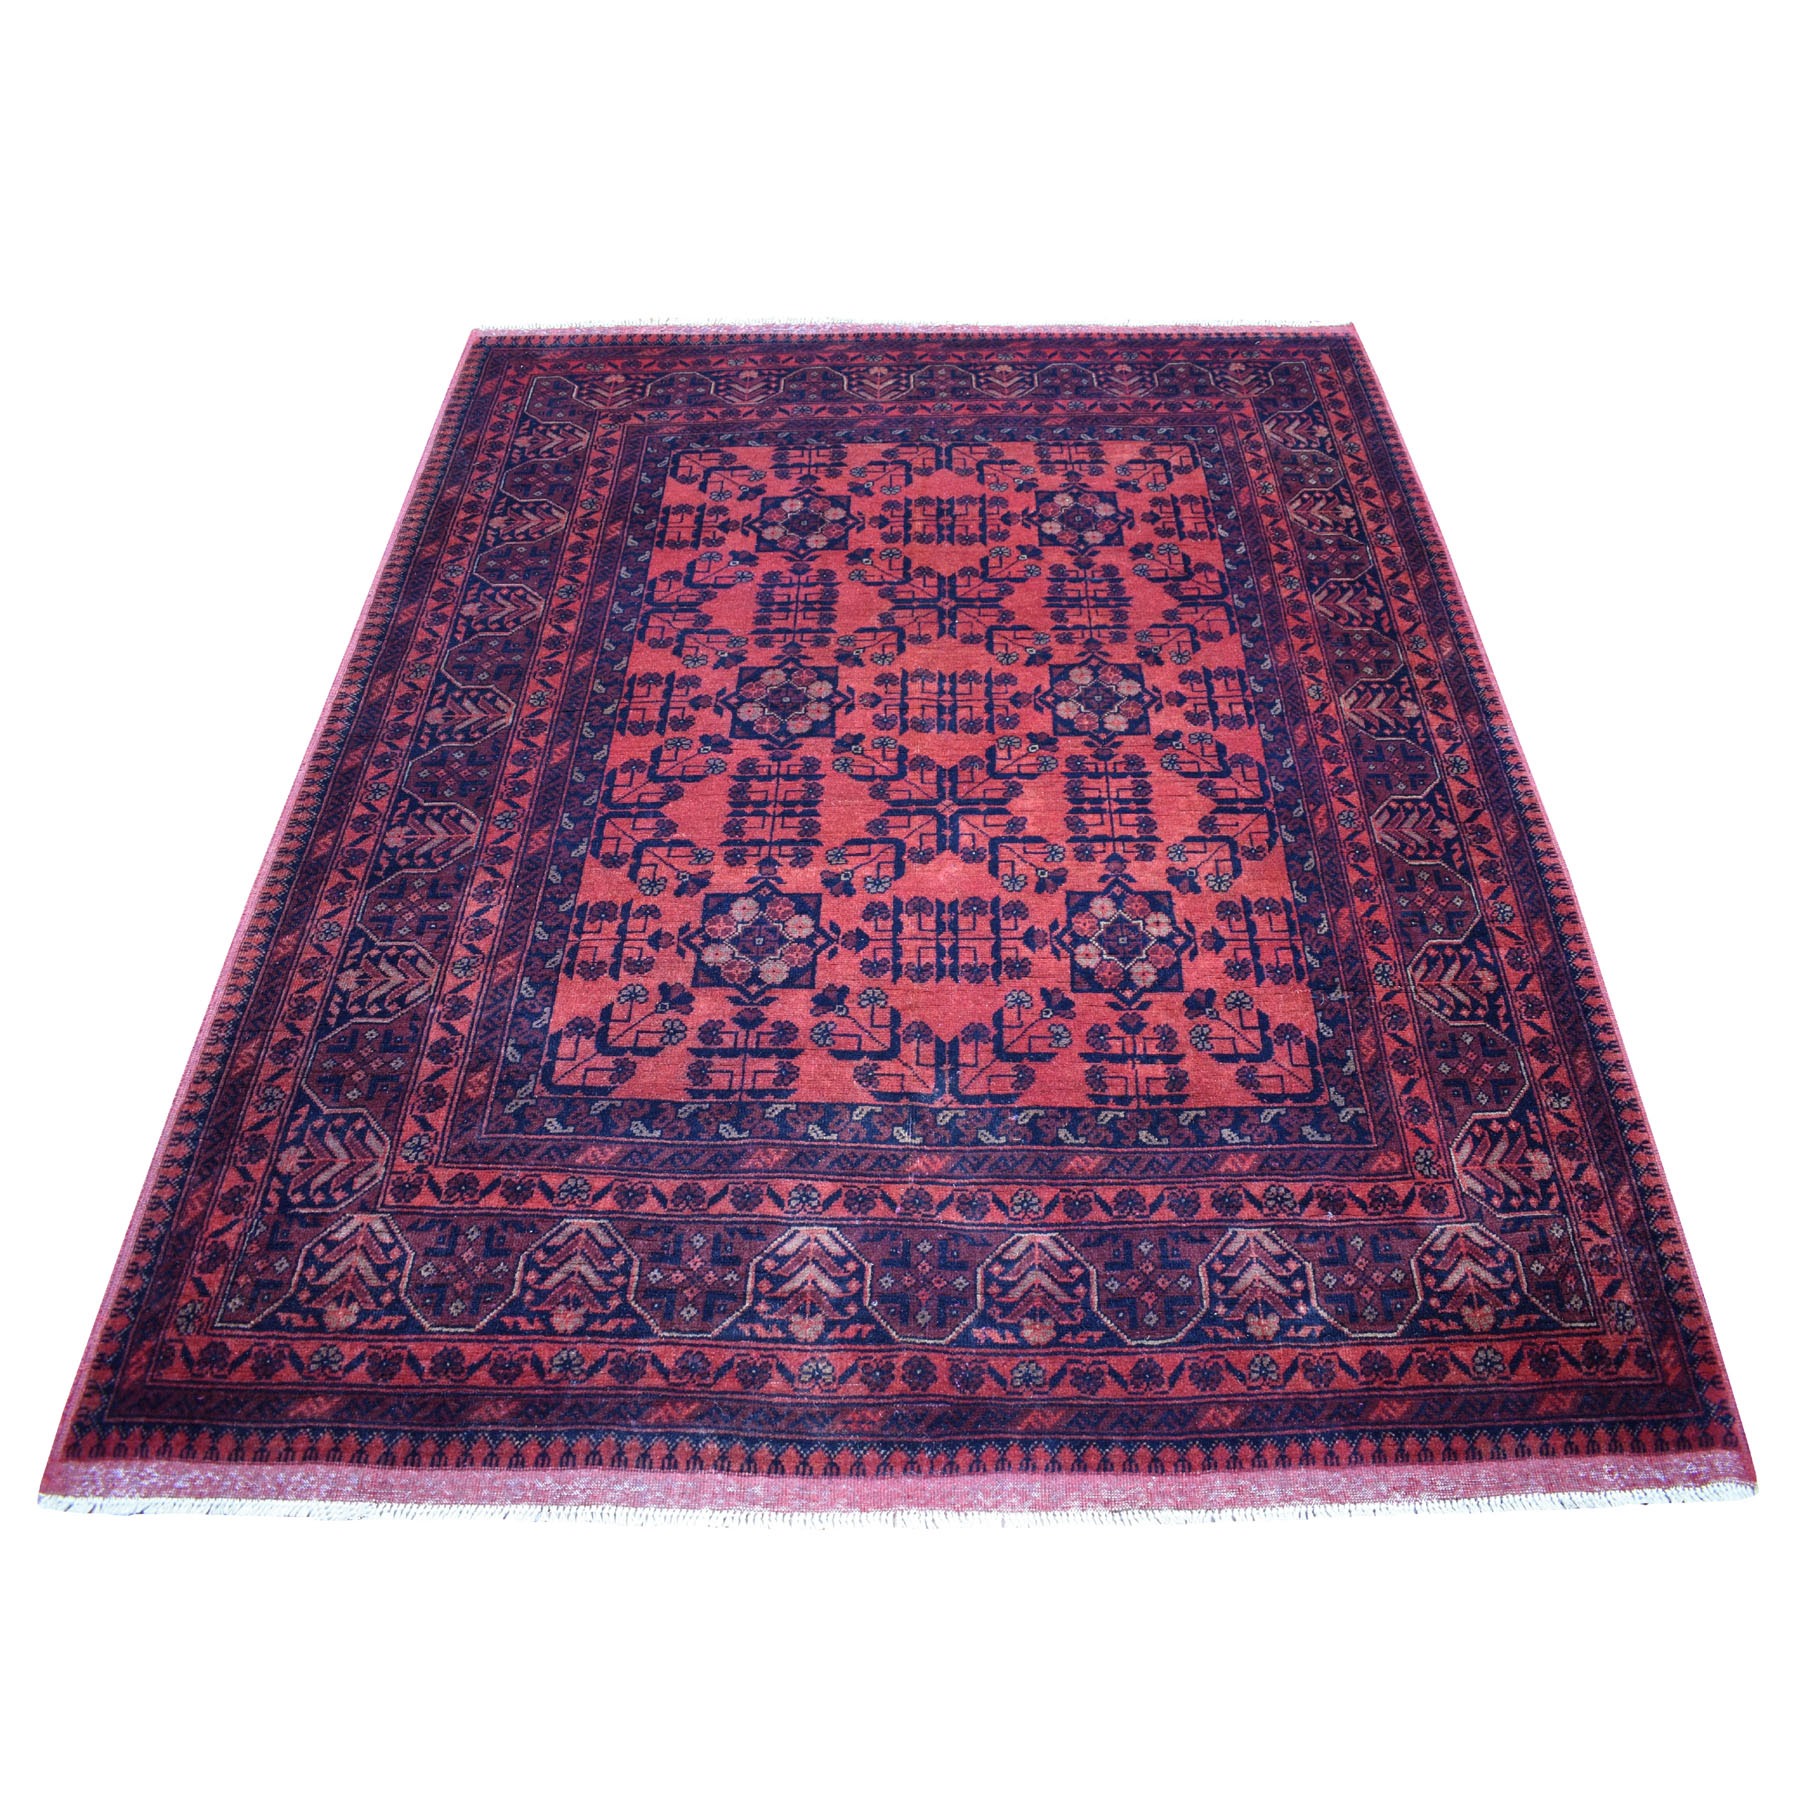 5'3"X6'6" Deep And Saturated Red Tribal Design Afghan Andkhoy Pure Wool Hand-Knotted Oriental Rug moaecd0c